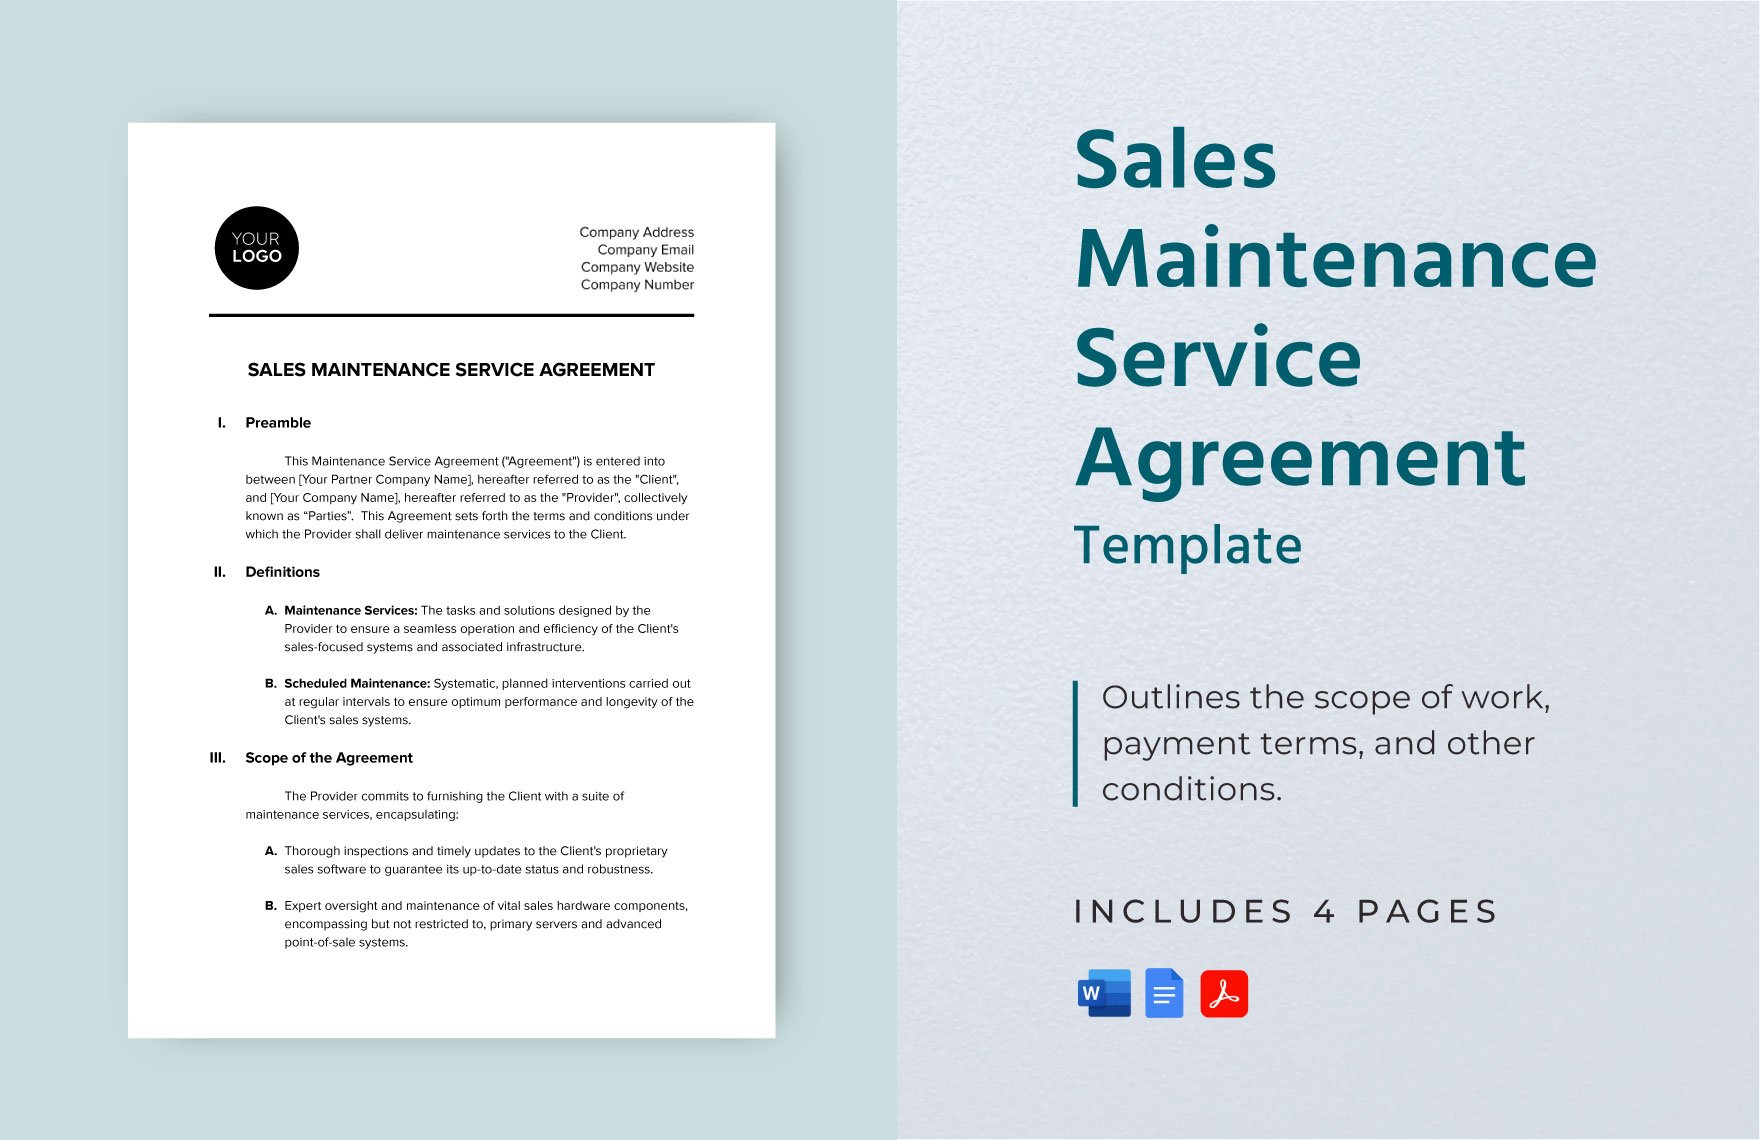 Sales Maintenance Service Agreement Template in Word, Google Docs, PDF